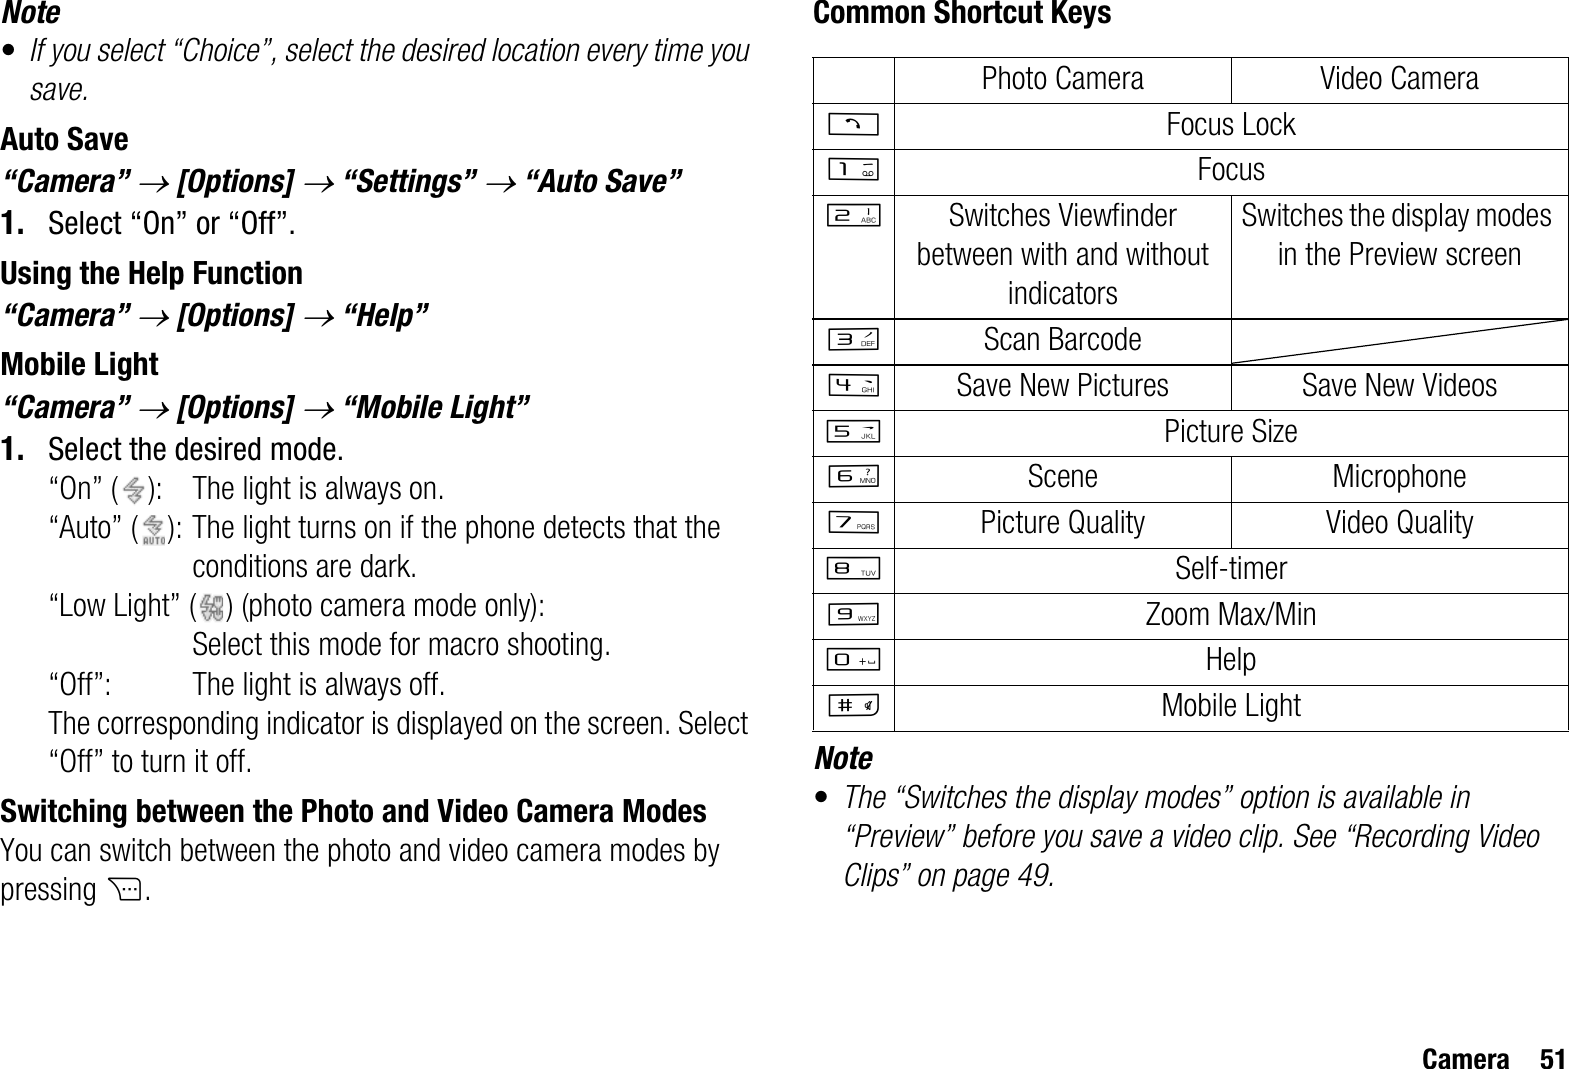 Camera 51Note•If you select “Choice”, select the desired location every time you save.Auto Save“Camera” o [Options] o “Settings” o “Auto Save”1. Select “On” or “Off”.Using the Help Function“Camera” o [Options] o “Help”Mobile Light“Camera” o [Options] o “Mobile Light”1. Select the desired mode.“On” ( ): The light is always on.“Auto” ( ): The light turns on if the phone detects that the conditions are dark.“Low Light” ( ) (photo camera mode only):Select this mode for macro shooting.“Off”: The light is always off.The corresponding indicator is displayed on the screen. Select “Off” to turn it off.Switching between the Photo and Video Camera ModesYou can switch between the photo and video camera modes by pressing C.Common Shortcut KeysNote•The “Switches the display modes” option is available in “Preview” before you save a video clip. See “Recording Video Clips” on page 49.Photo Camera Video CameraDFocus LockGFocusHSwitches Viewfinder between with and without indicatorsSwitches the display modes in the Preview screenIScan BarcodeJSave New Pictures Save New VideosKPicture SizeLScene MicrophoneMPicture Quality Video QualityNSelf-timerOZoom Max/MinQHelpRMobile Light